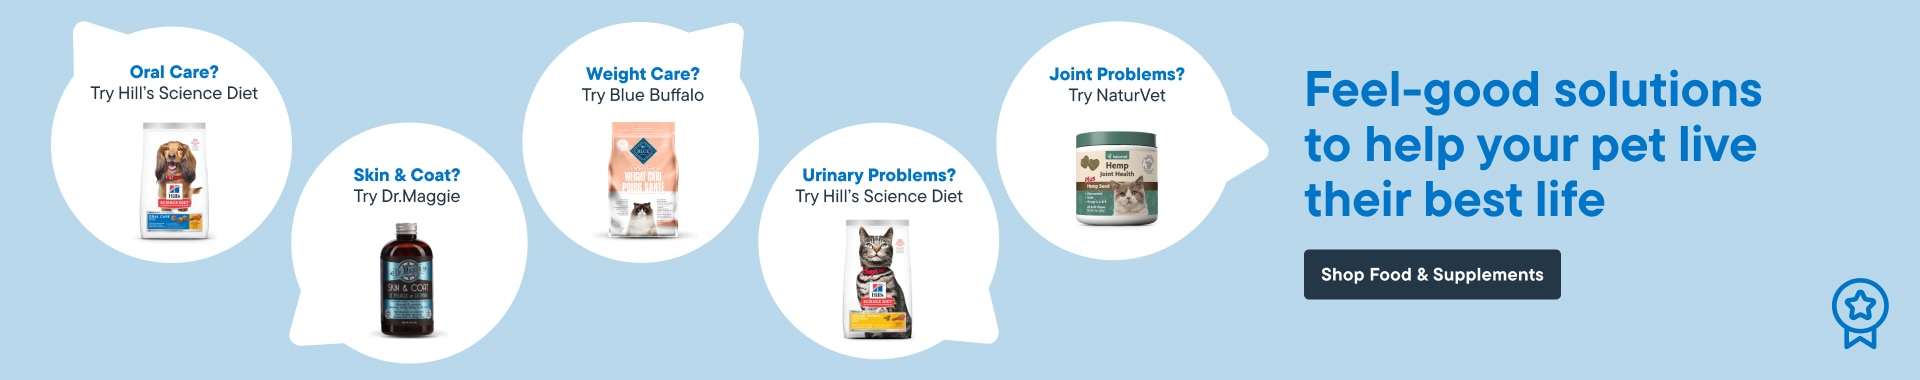 Feel-good solutions to help your pet live their best life - Shop Food & Supplements